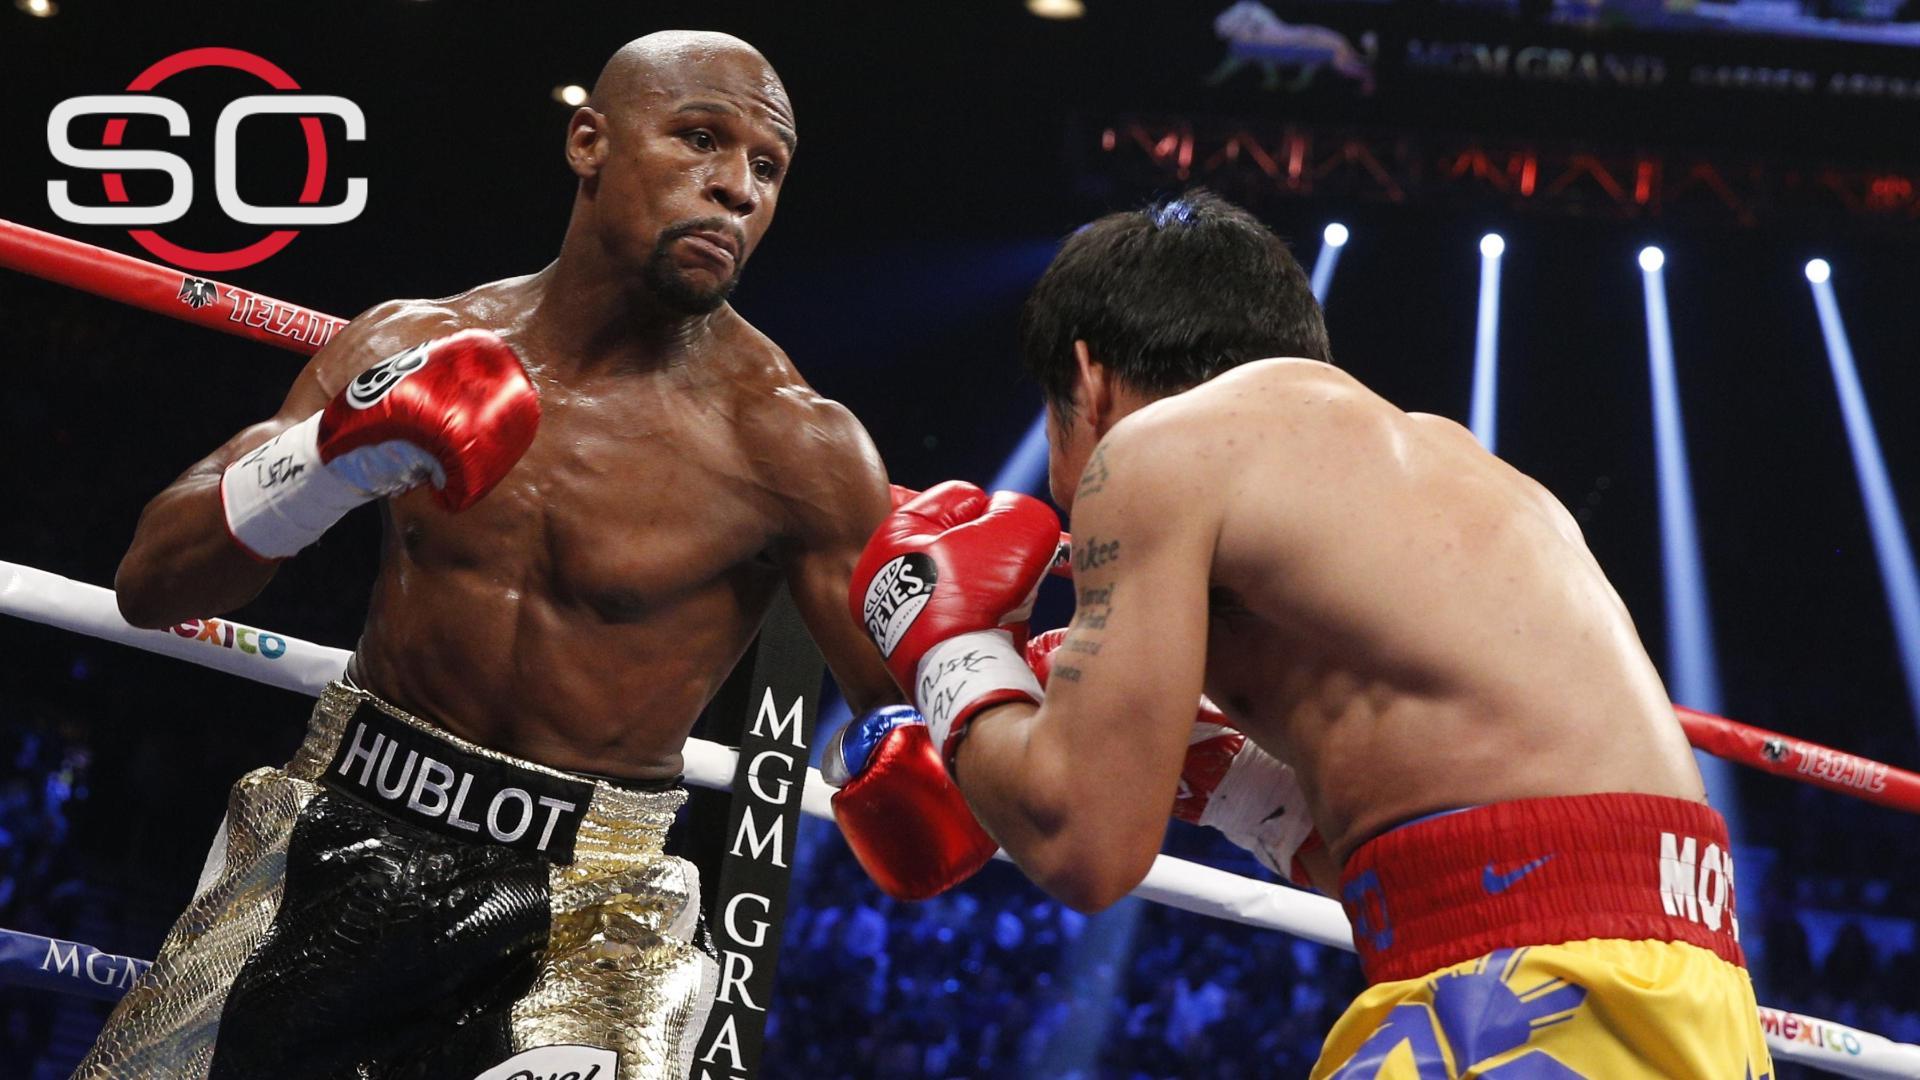 REPORT: FLOYD MAYWEATHER USED WADA BANNED IV BEFORE MANNY PACQUIAO